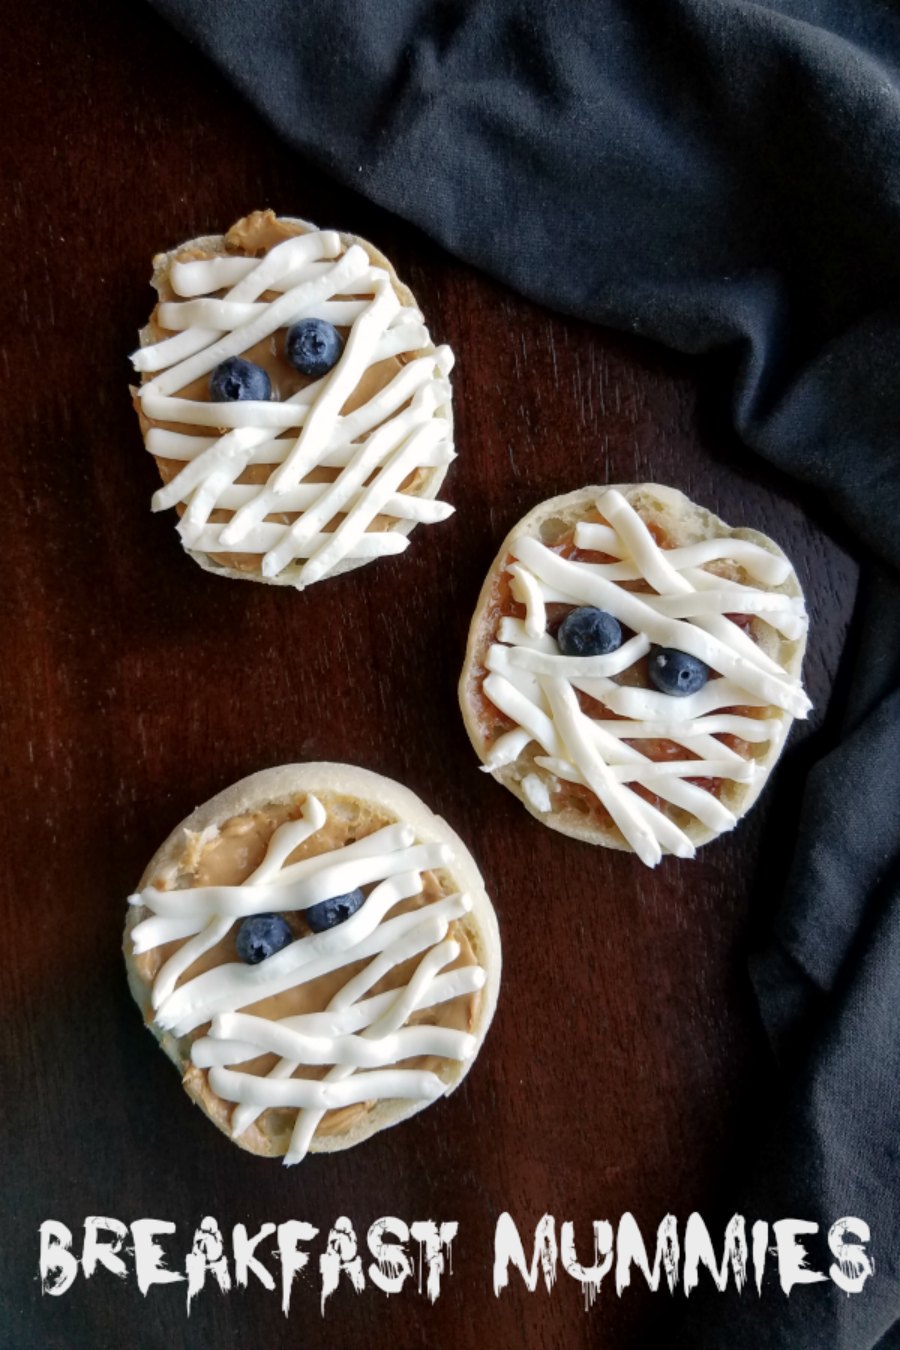 These super simple English muffin mummies are ready to spook your breakfast table. They are an eerily good Halloween snack as well. Whip them up in a couple minutes and cackle in delight.